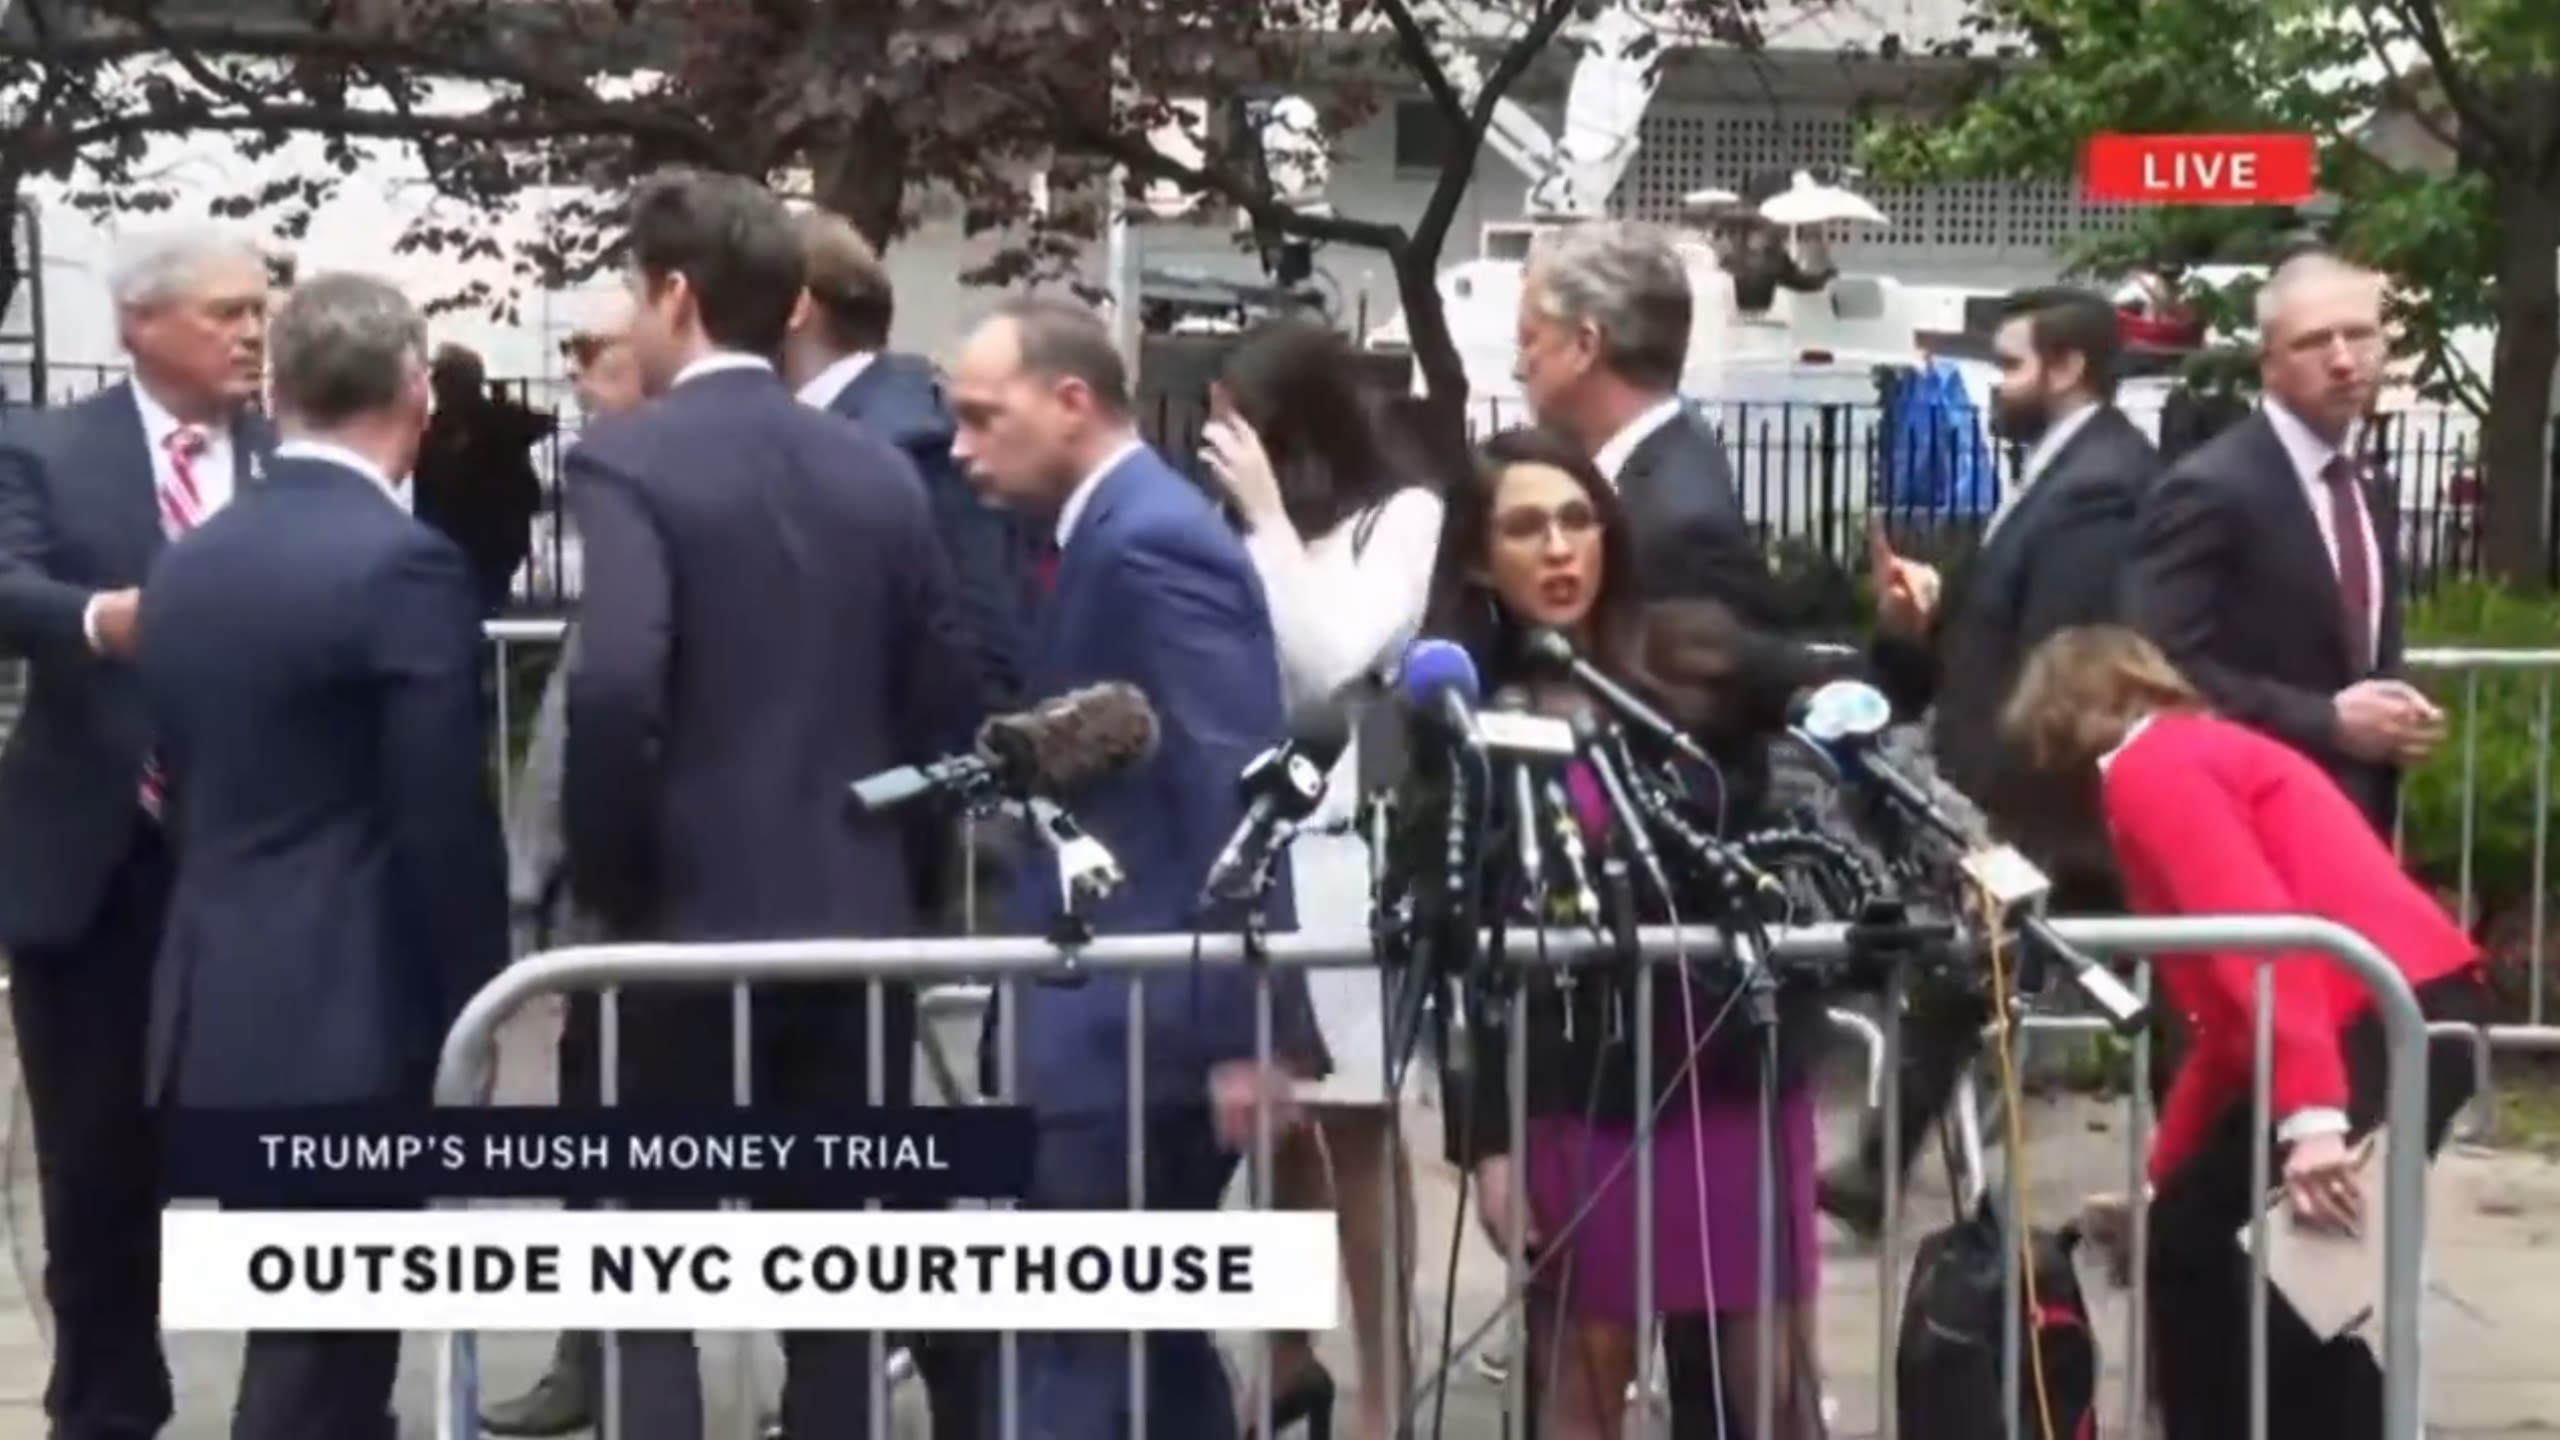 ‘Beetlejuice!’ Lauren Boebert Heckled By Protesters Outside Trump’s NY Trial